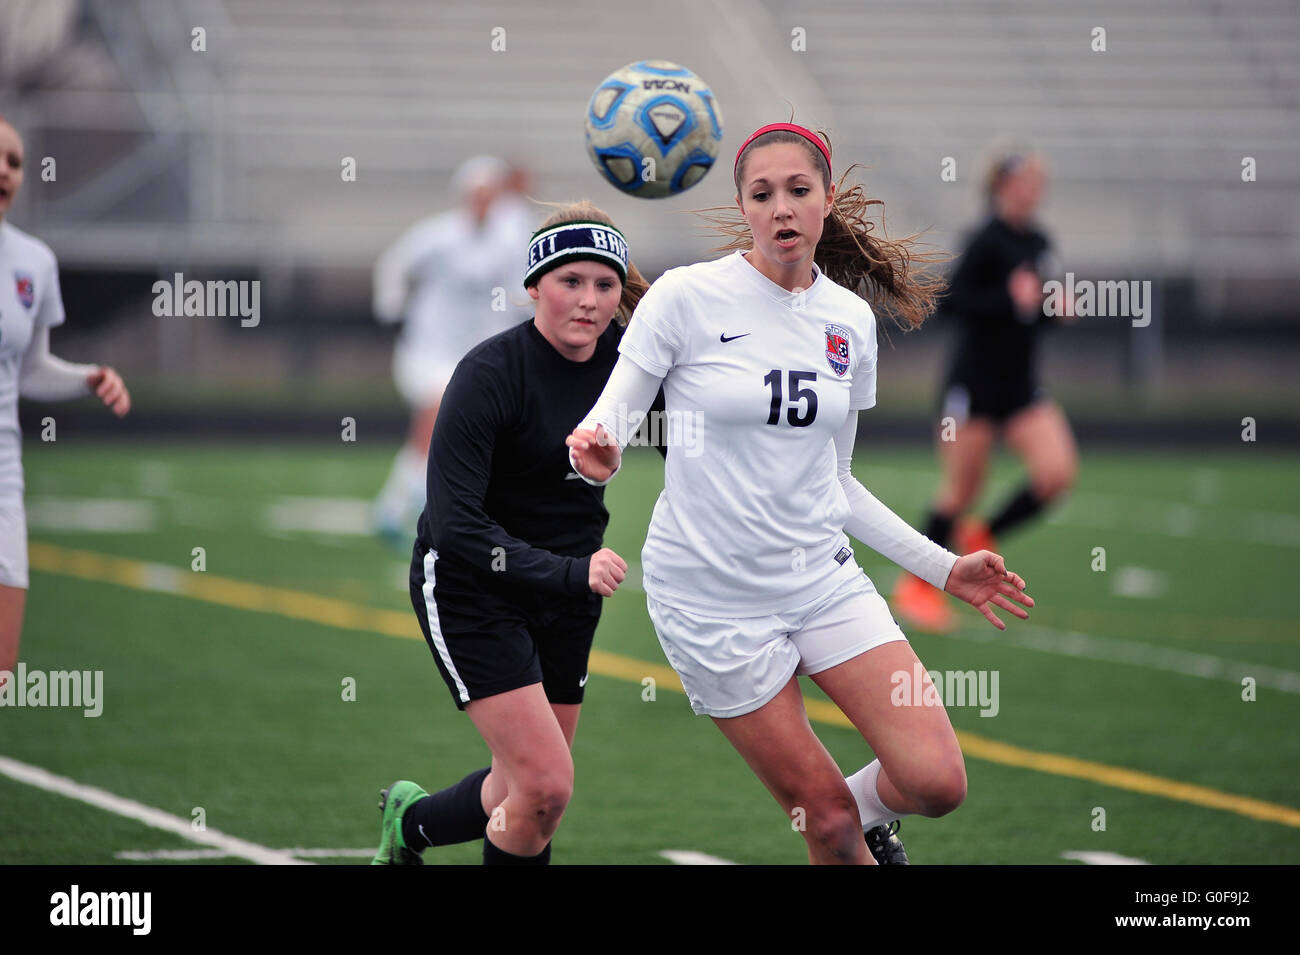 Players battle along the sideline for control of inbounded ball during a high school soccer match. USA. Stock Photo